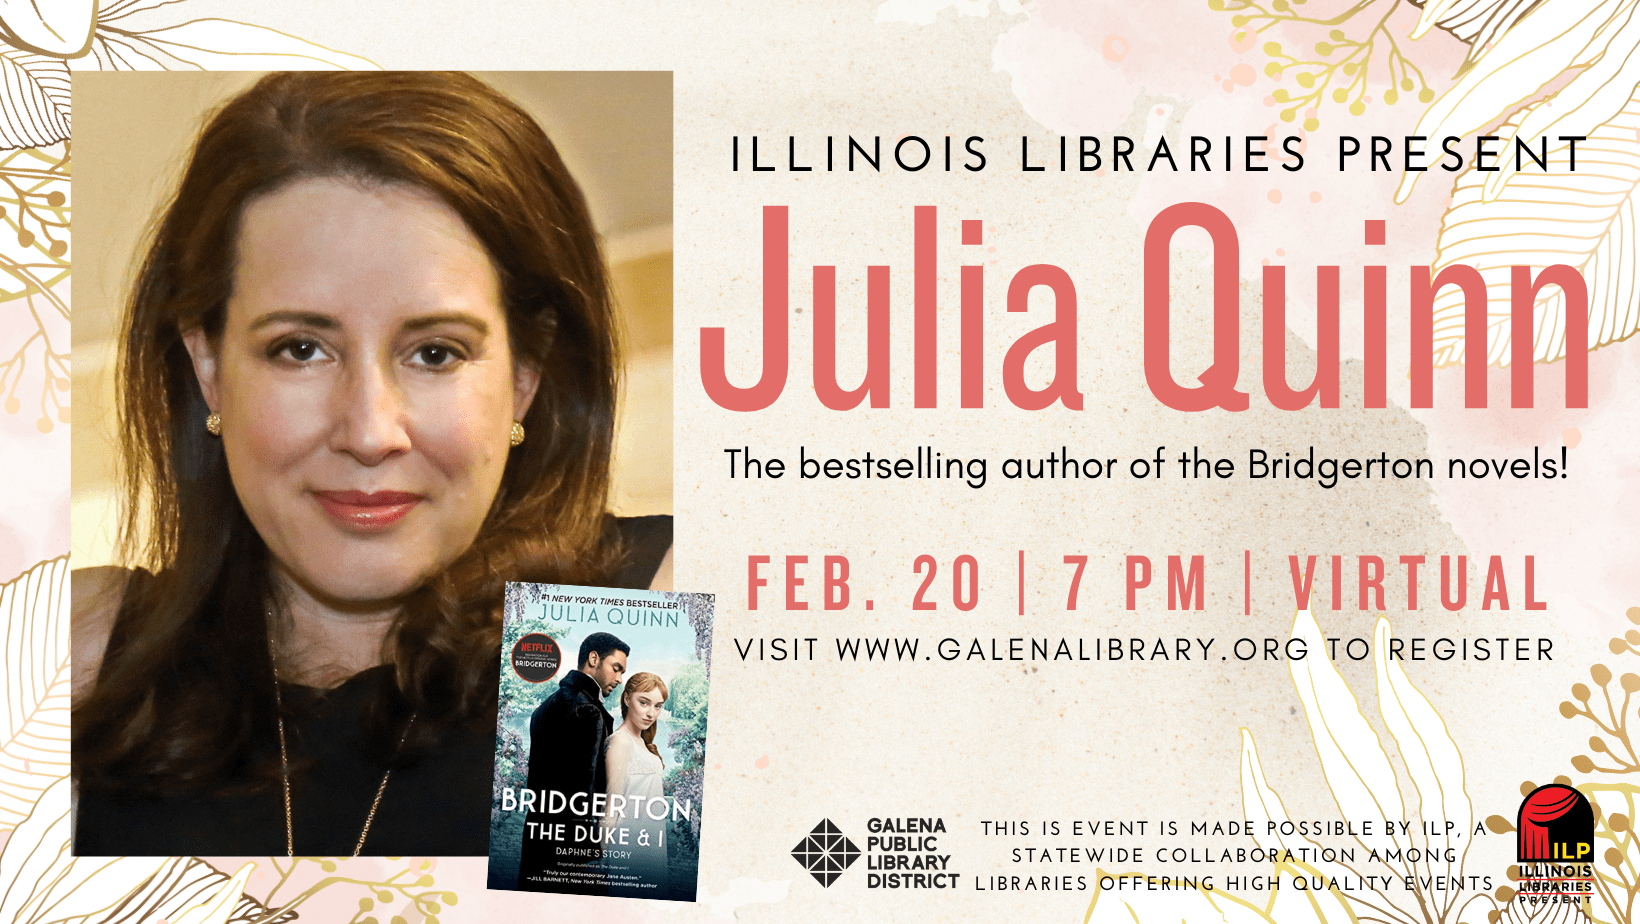 Illinois Libraries Present Julia Quinn, the bestelling author of the Bridgerton novels! February 20 at 7pm. Virtual only. click to register.